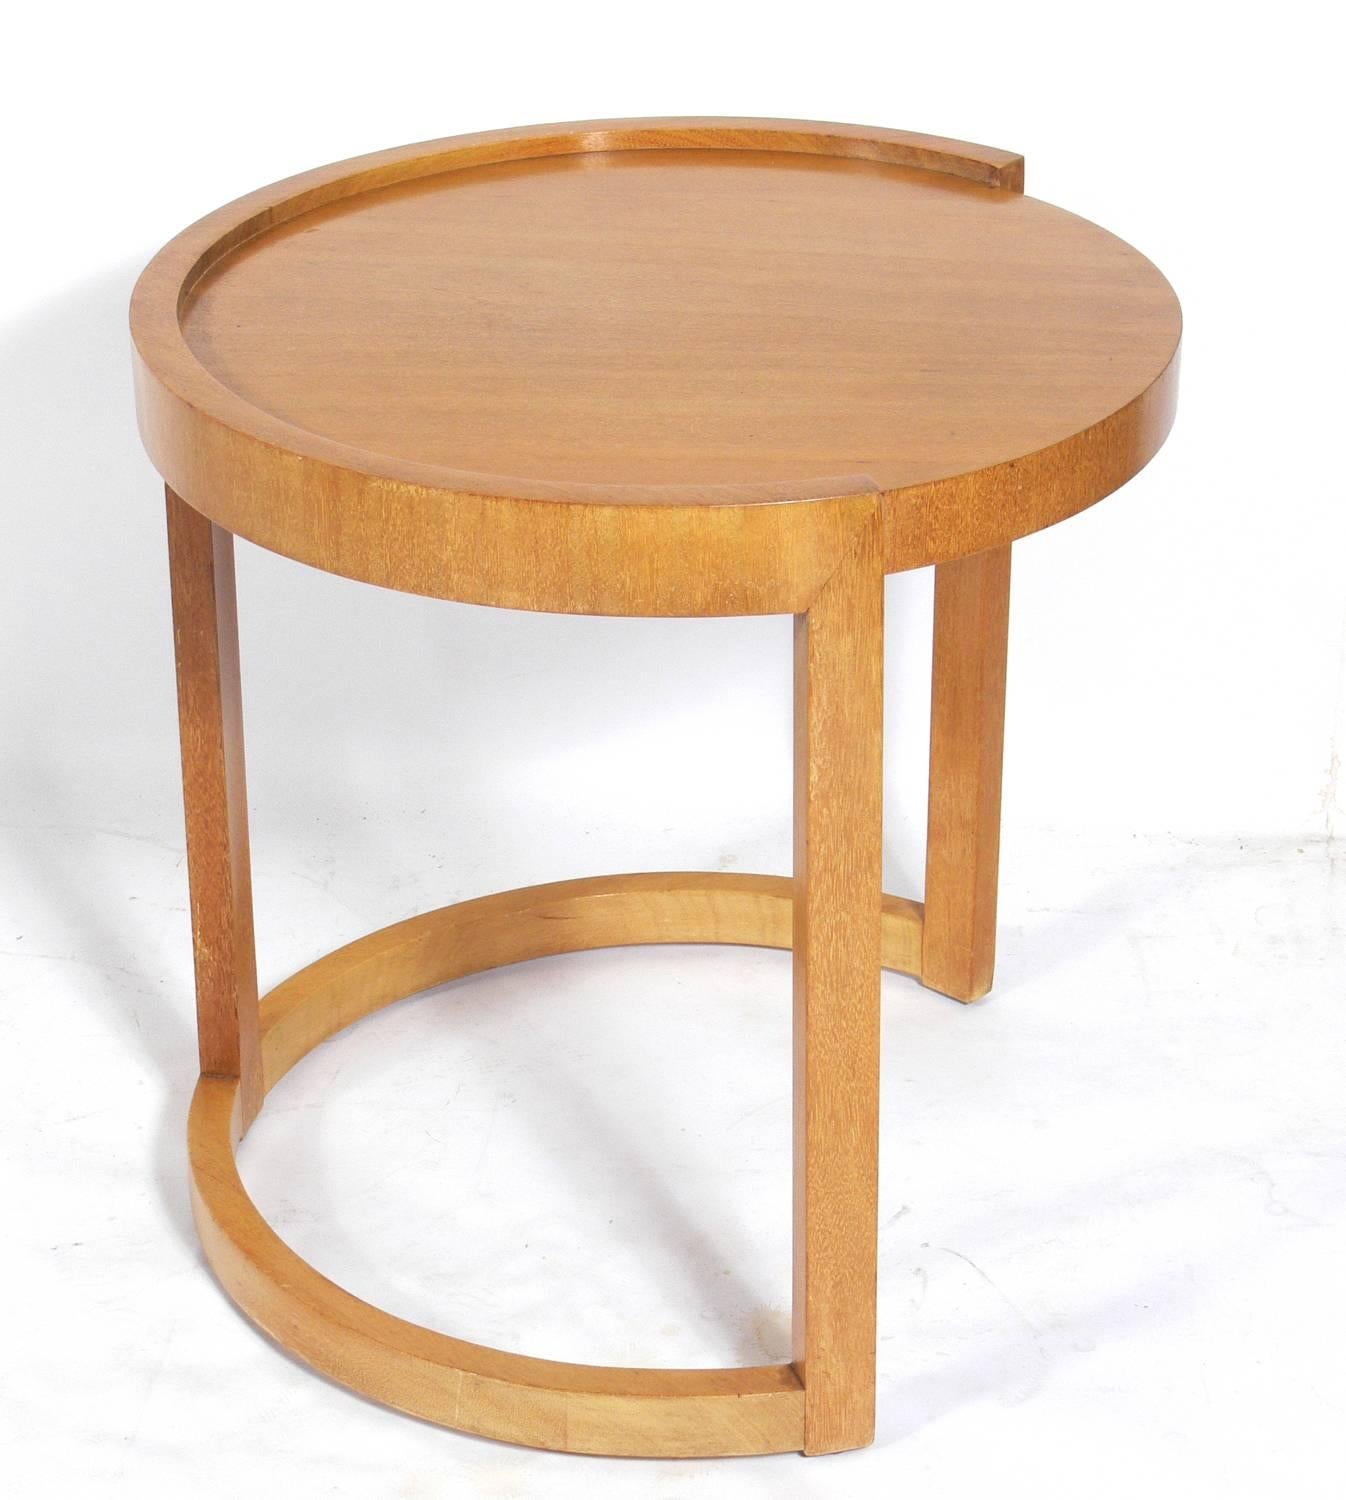 Sculptural end or center table by Paul Laszlo for Brown Saltman, American, circa 1950s. Signed with manufacturer and designers signature label underneath. It is a generous size and can be used as an end or side table, or as a nightstand or center